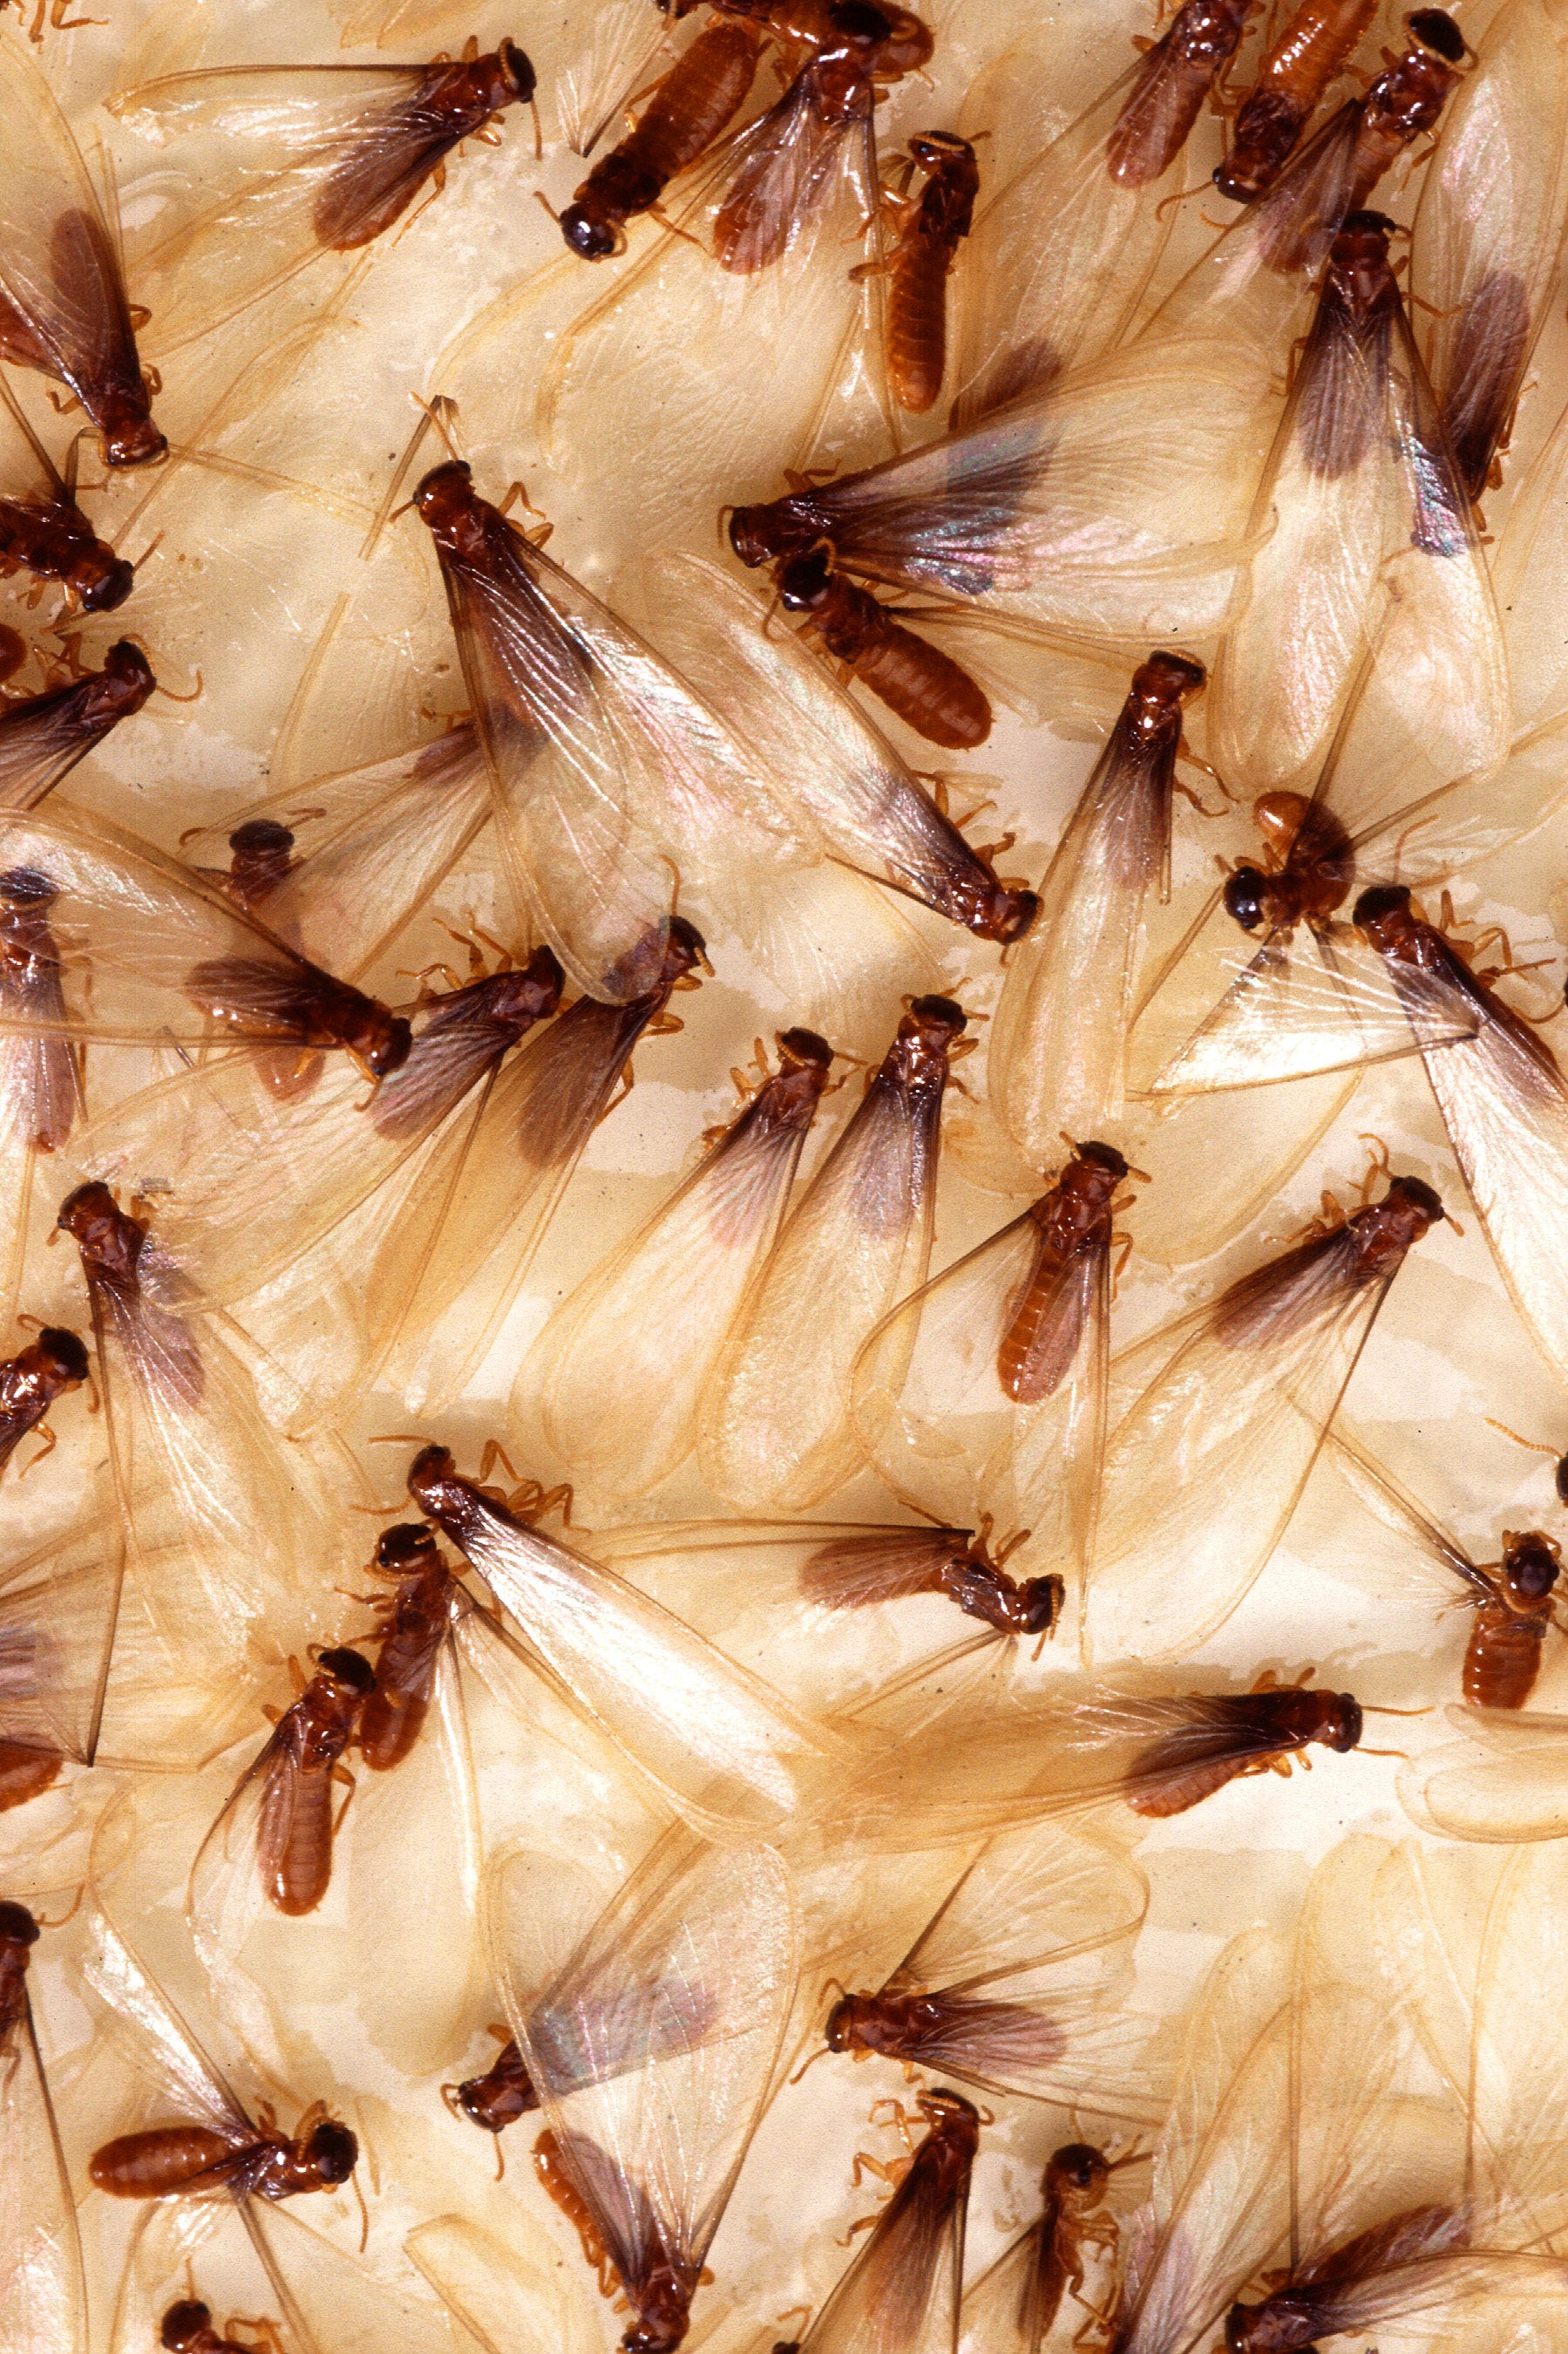 should i buy a house that has termites